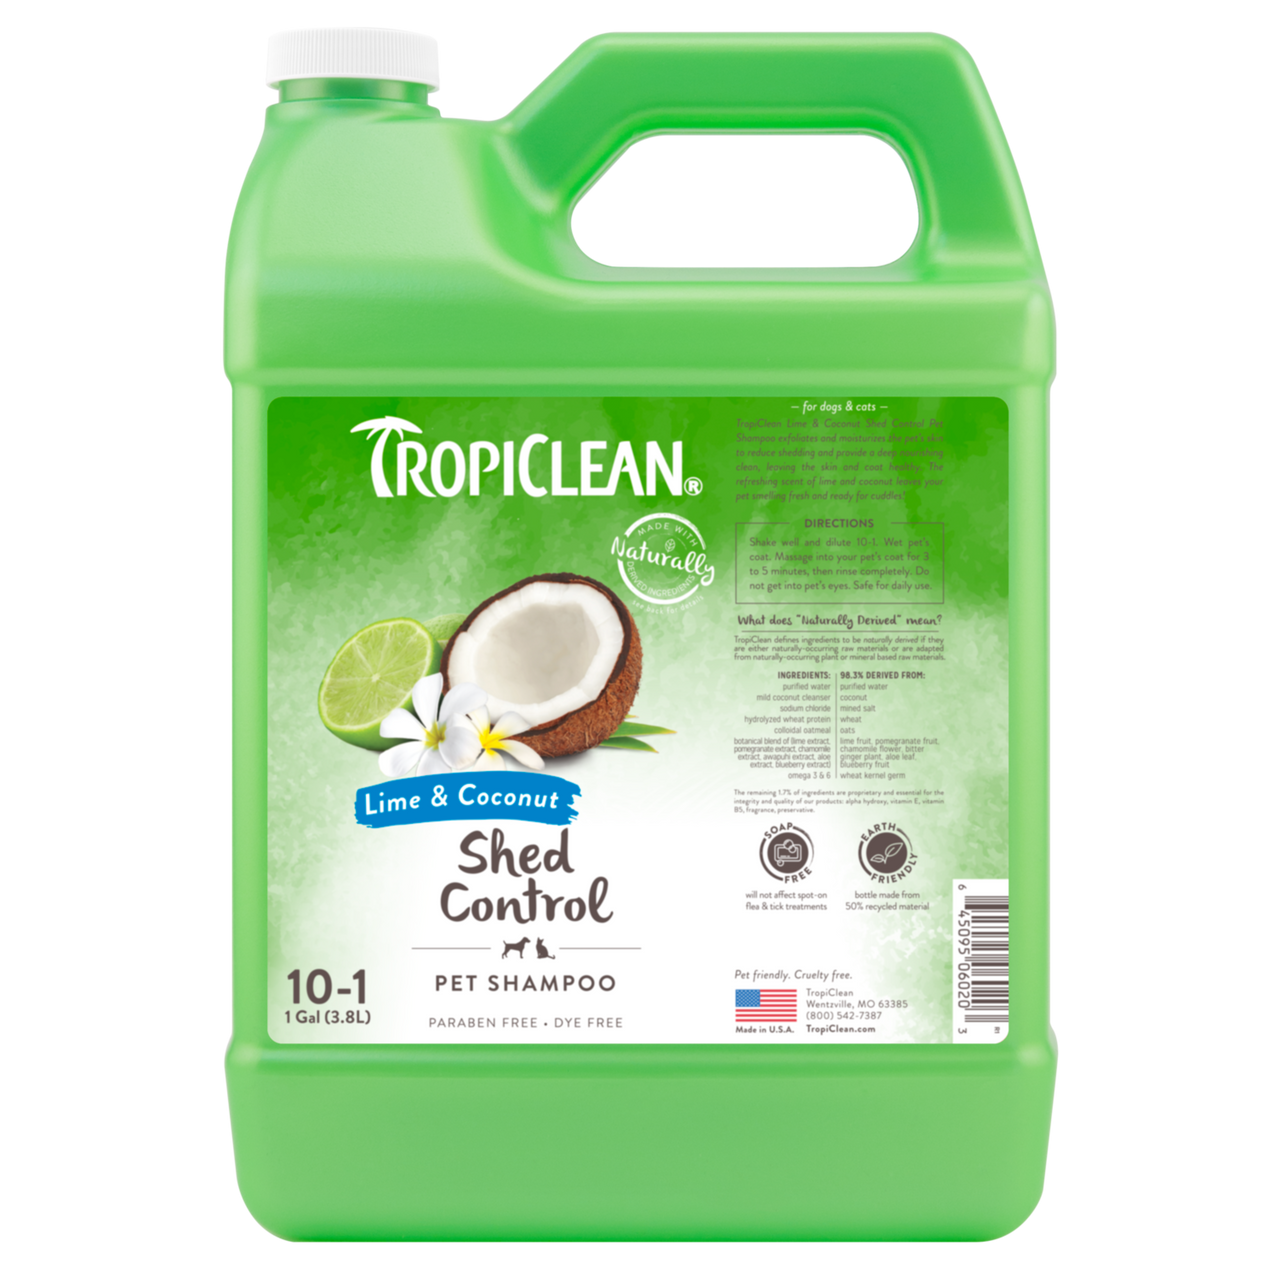 TropiClean Lime & Coconut Shed Control Shampoo for Pets 1 gal